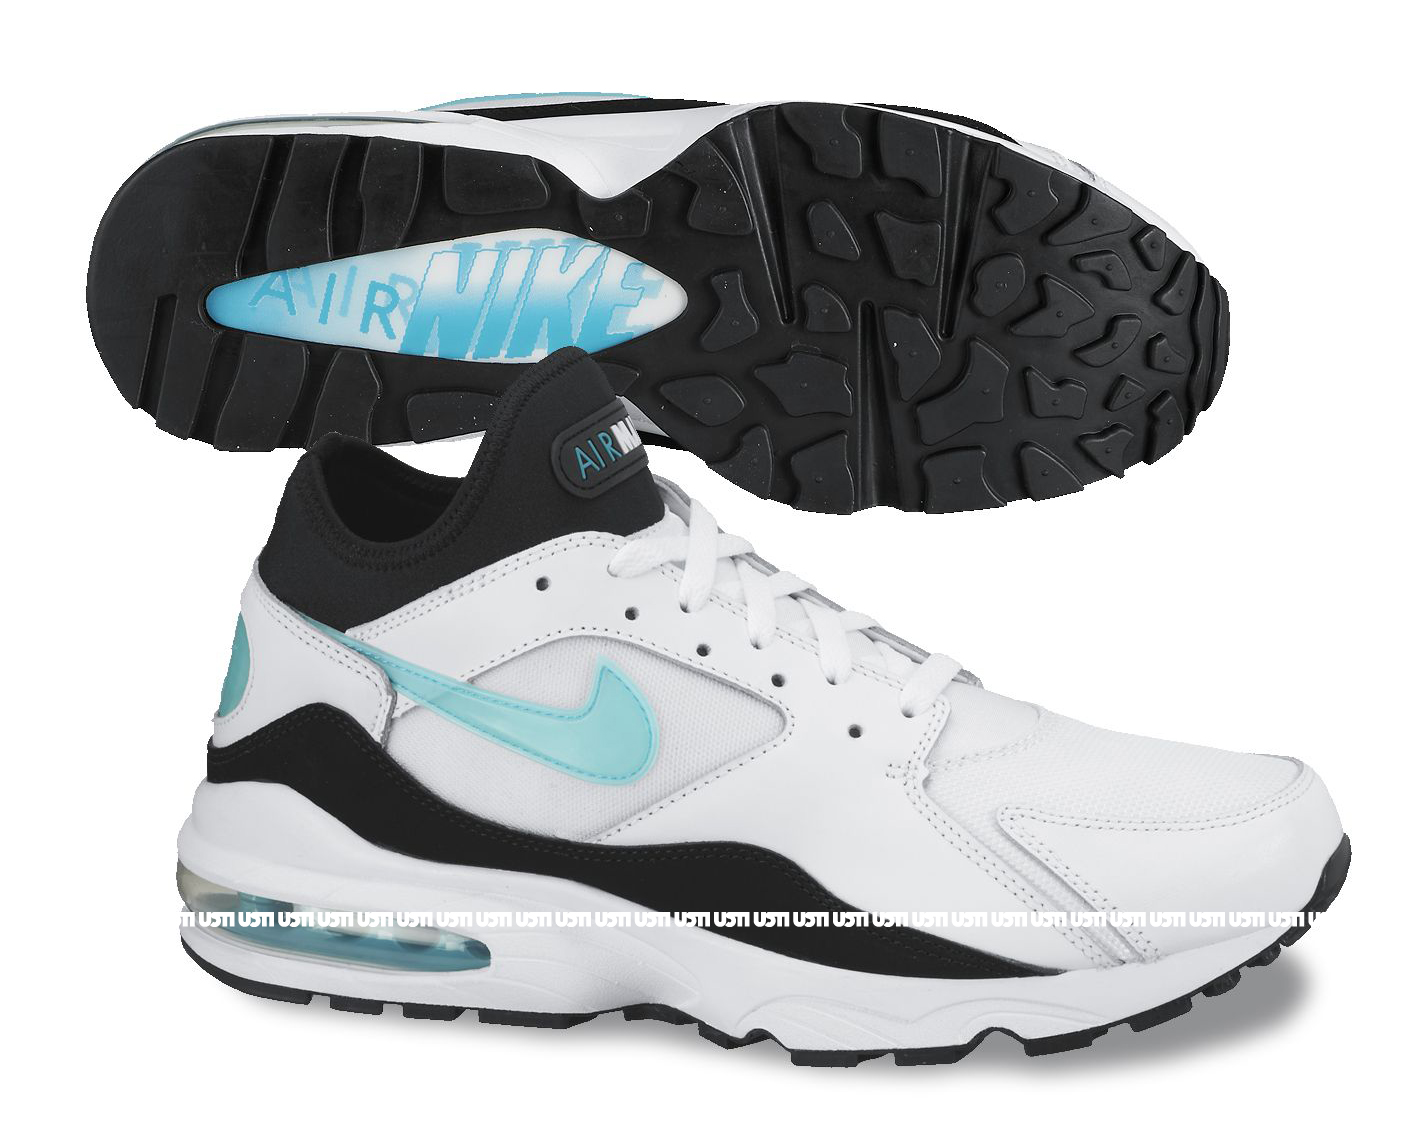 Nike Air Max 93 - Back in 2014 | Sole Collector